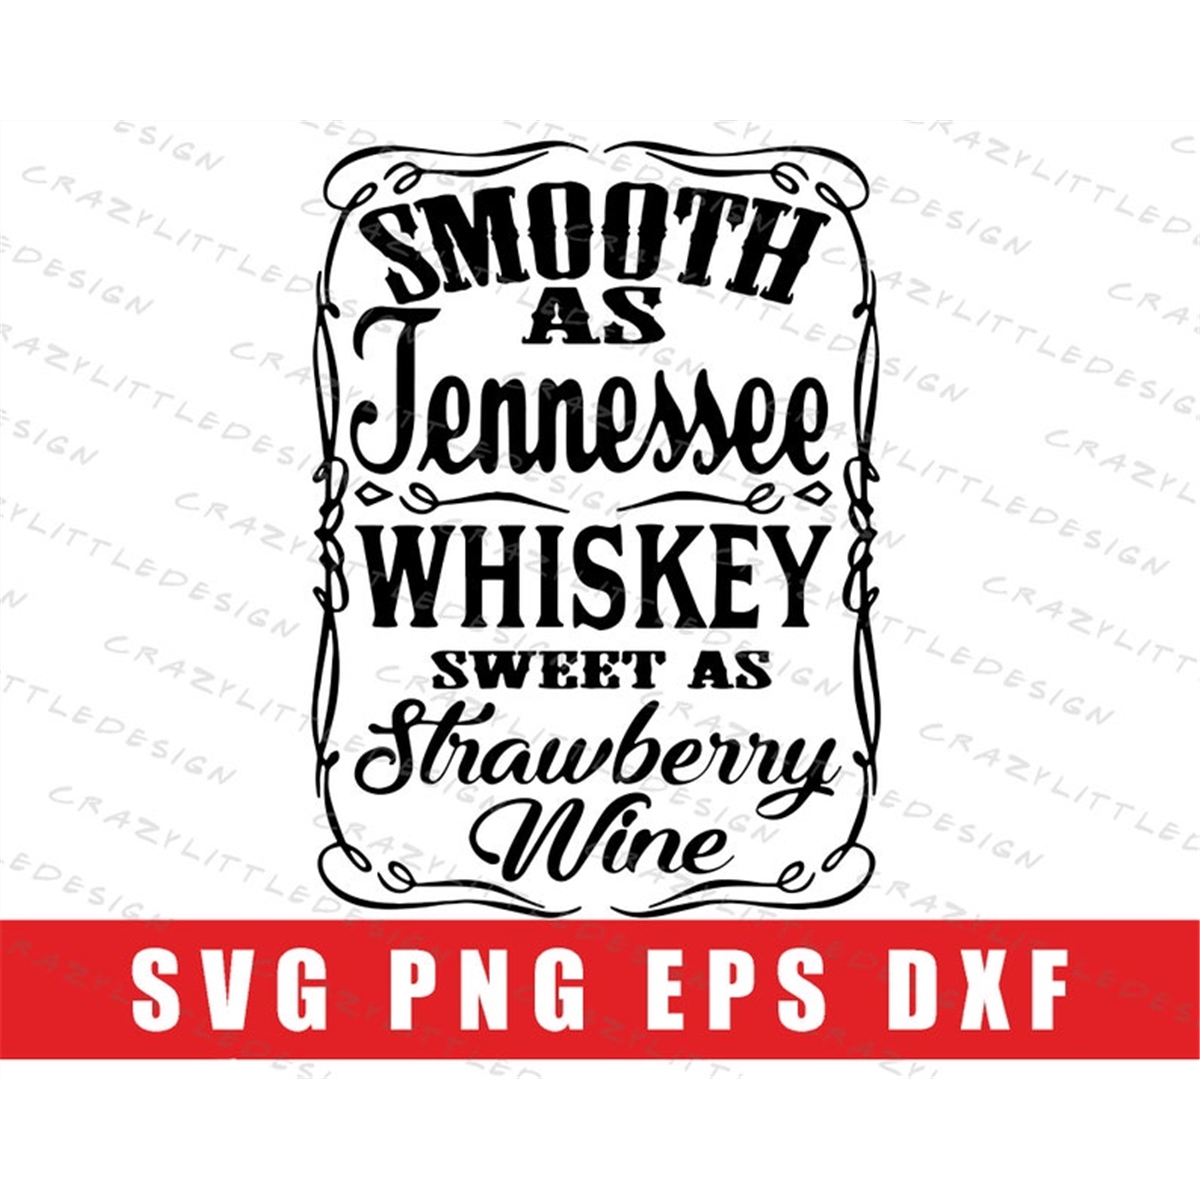 smooth-as-tennessee-whiskey-svg-png-eps-dfx-strawberry-wine-image-1